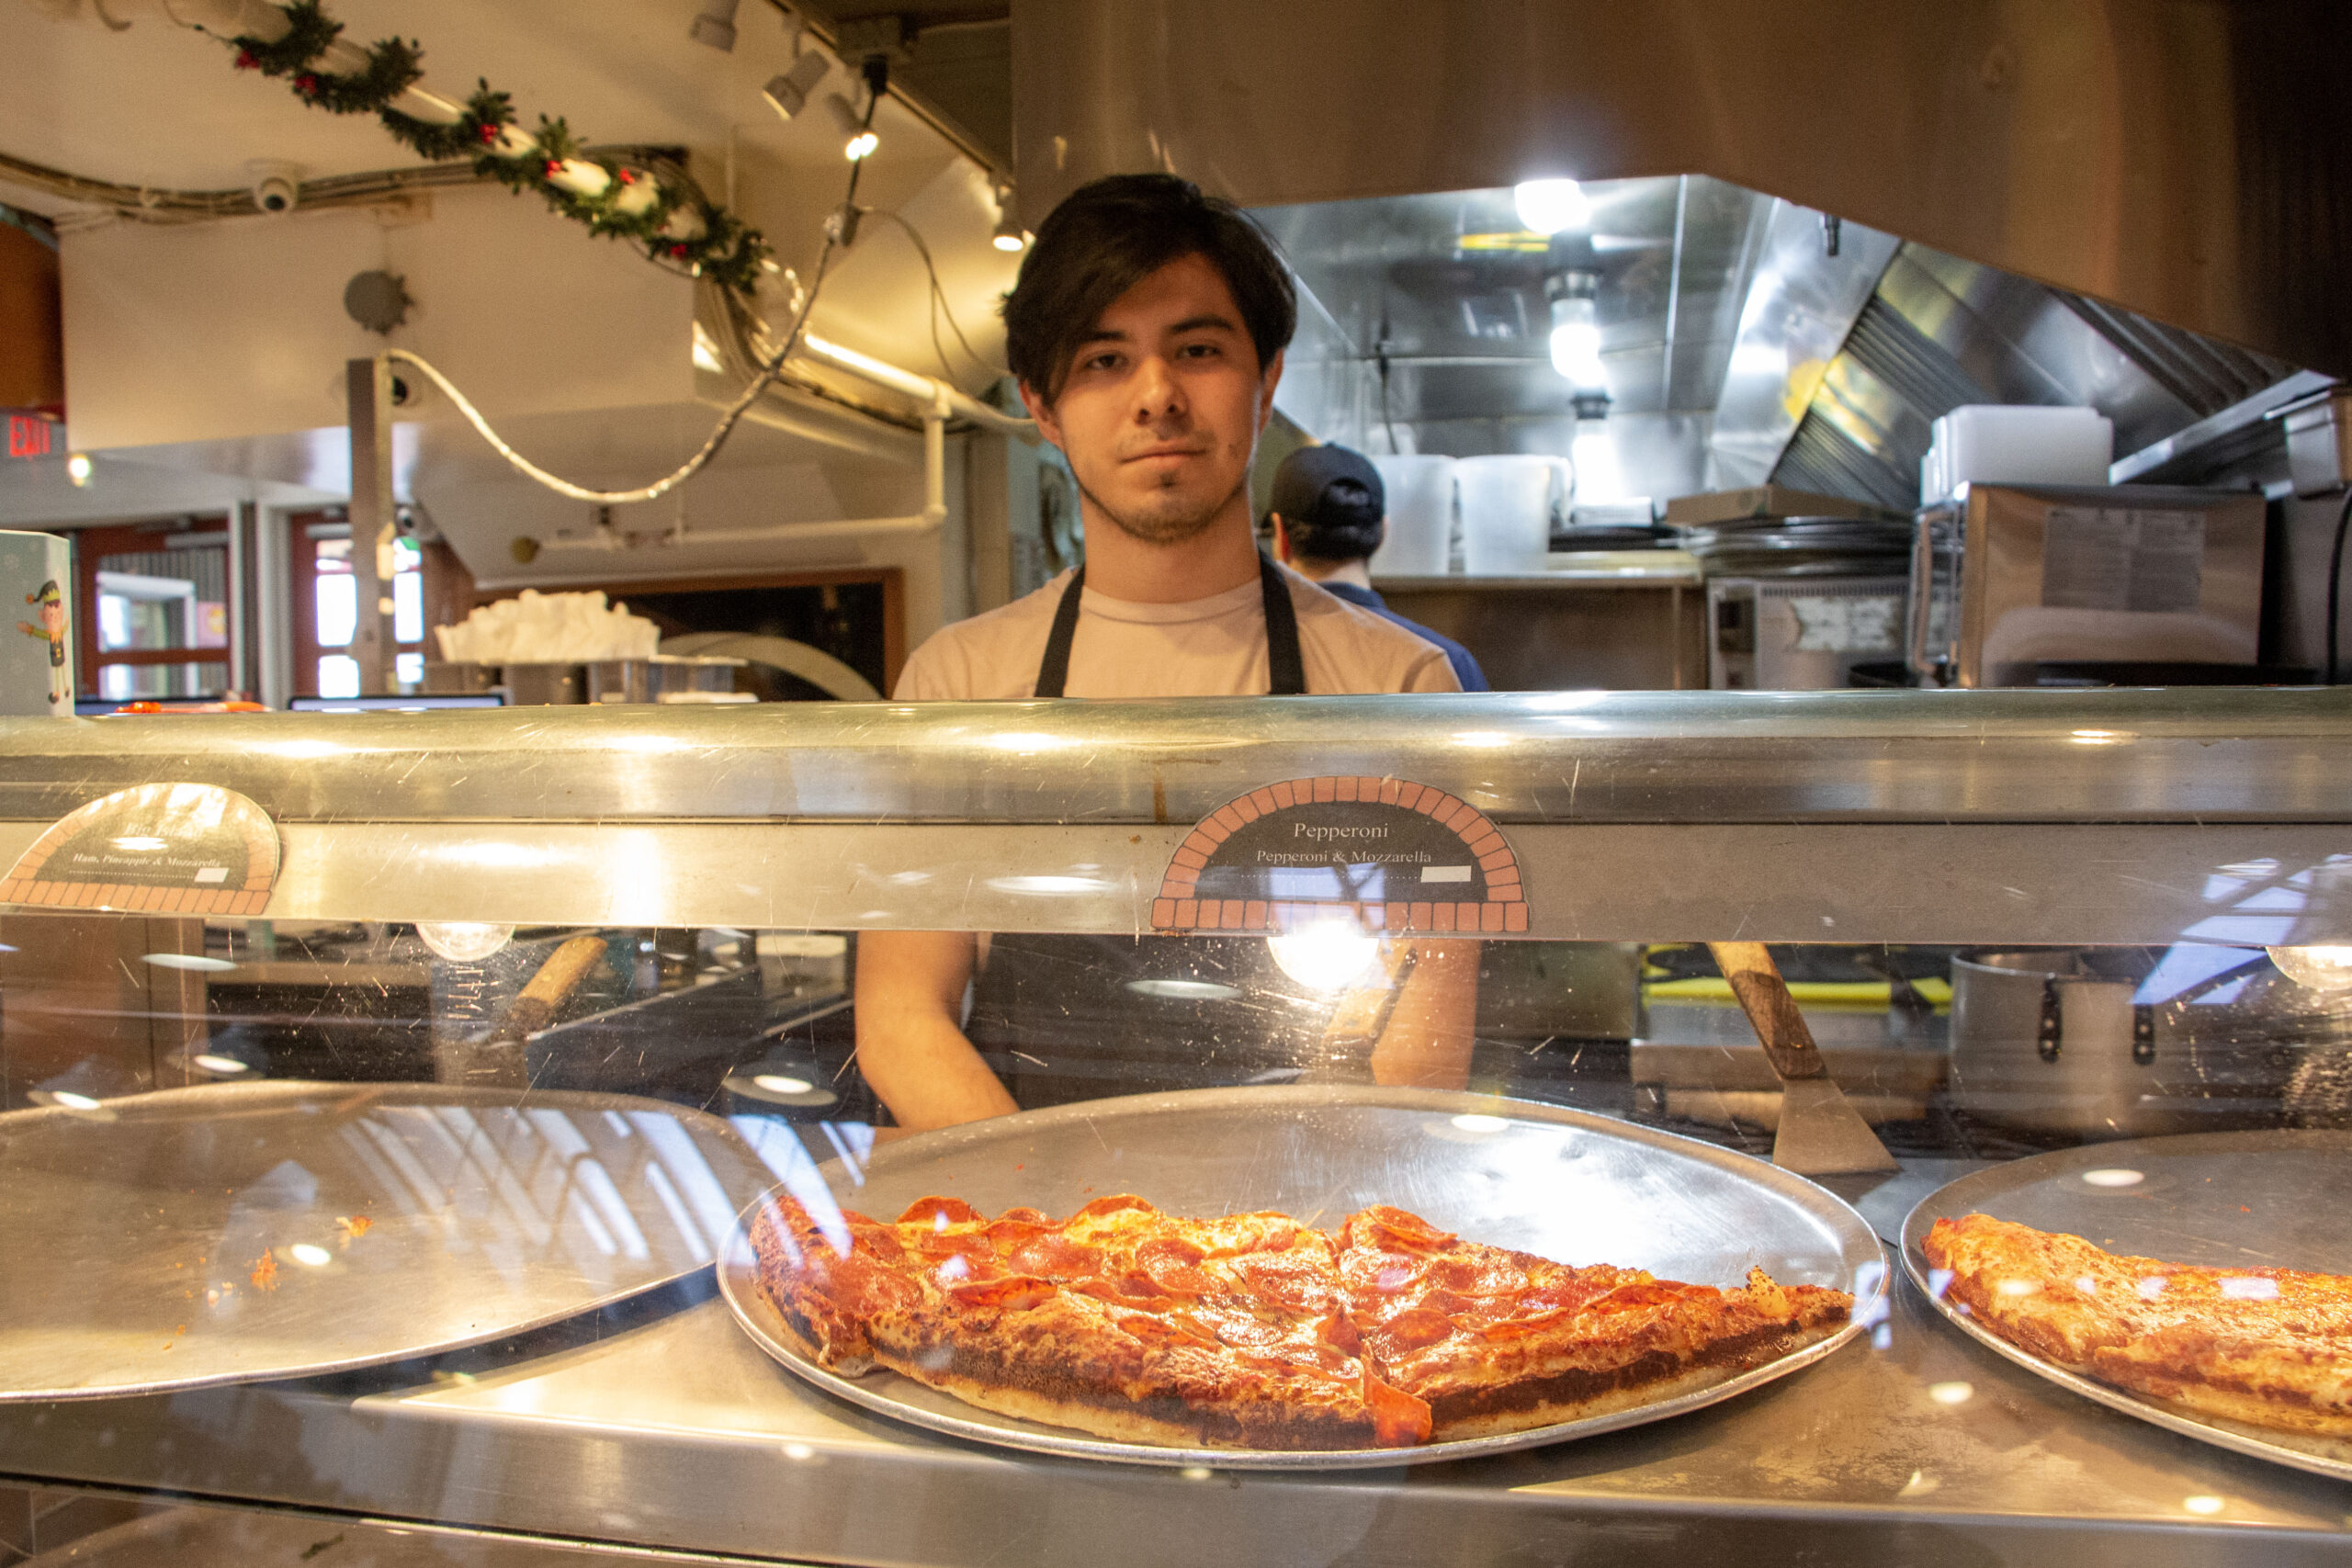 A man in an apron stands behind a display counter with a pizza inside of it.